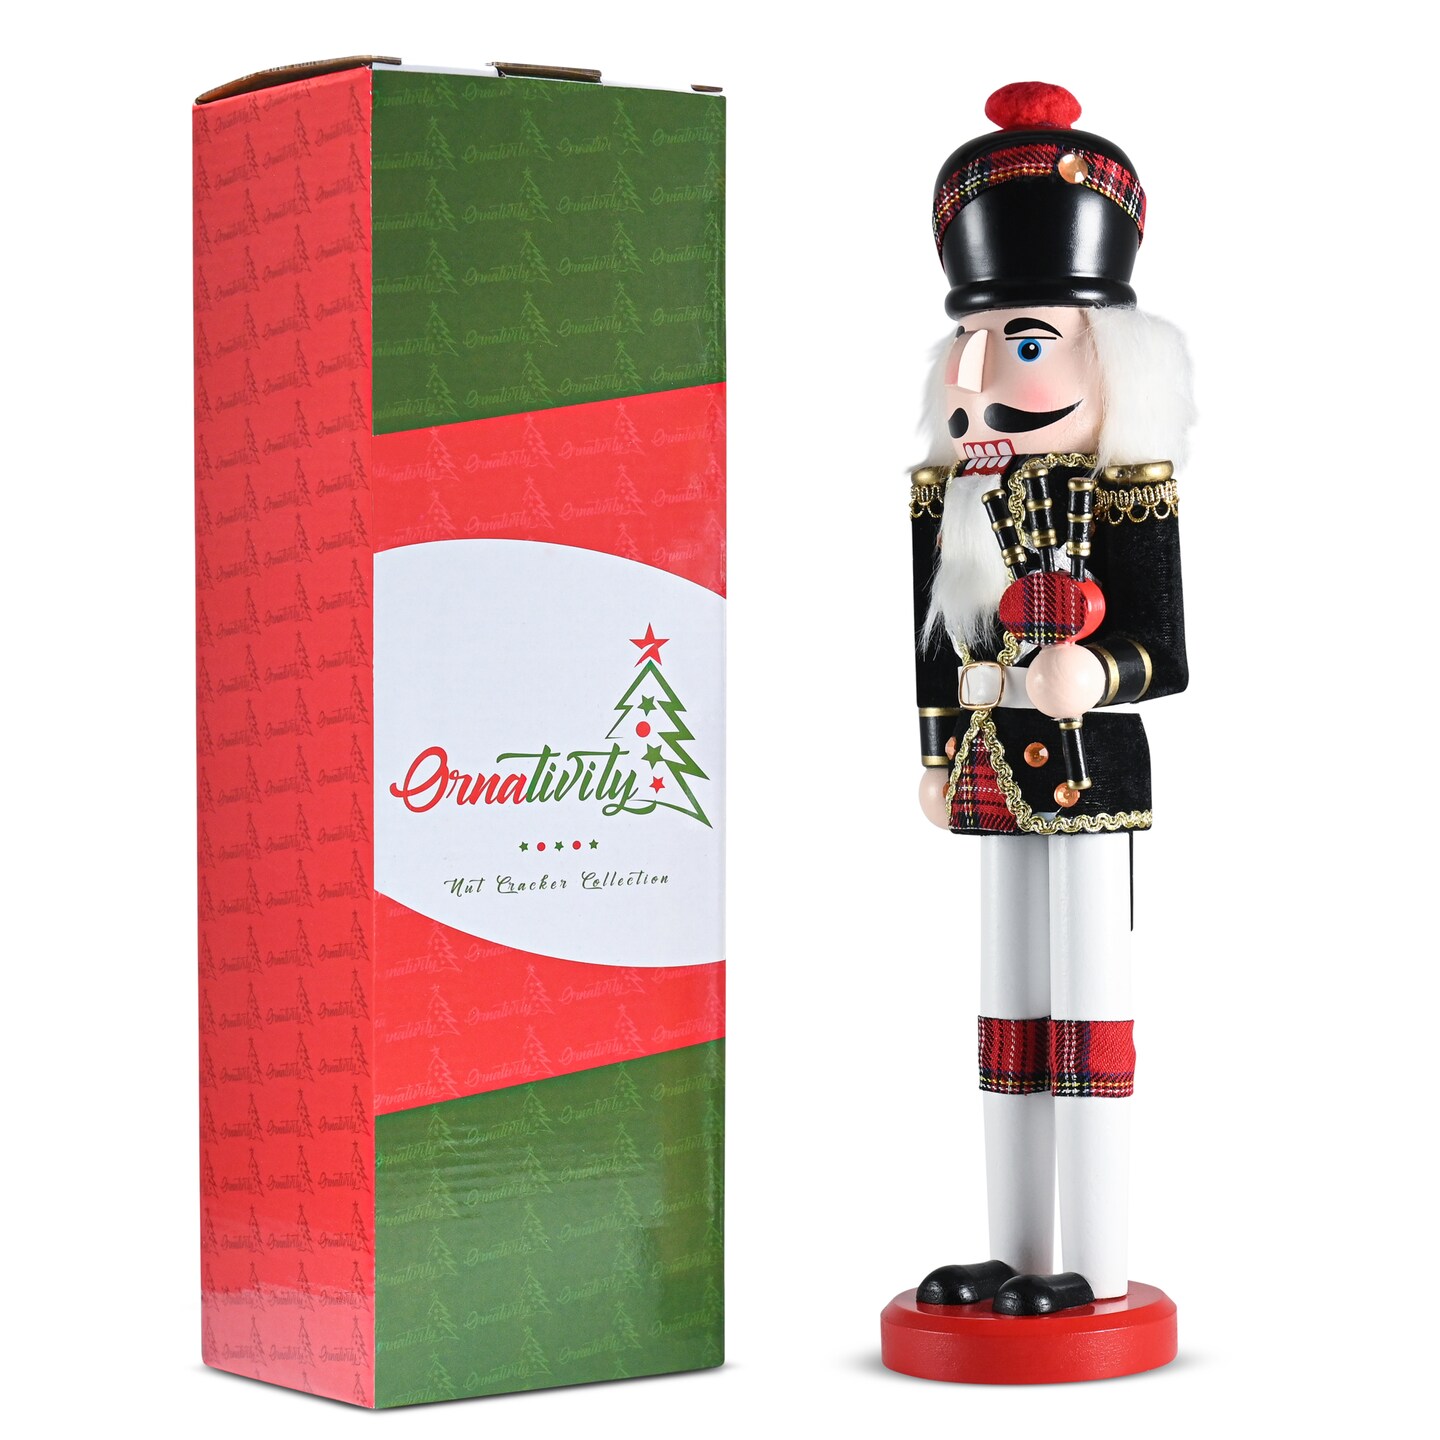 Ornativity Christmas Bagpipe Soldier Nutcracker &#x2013; Red and Black Wooden Nutcracker Soldier with Bagpipe Xmas Themed Holiday Nut Cracker Doll Figure Decorations